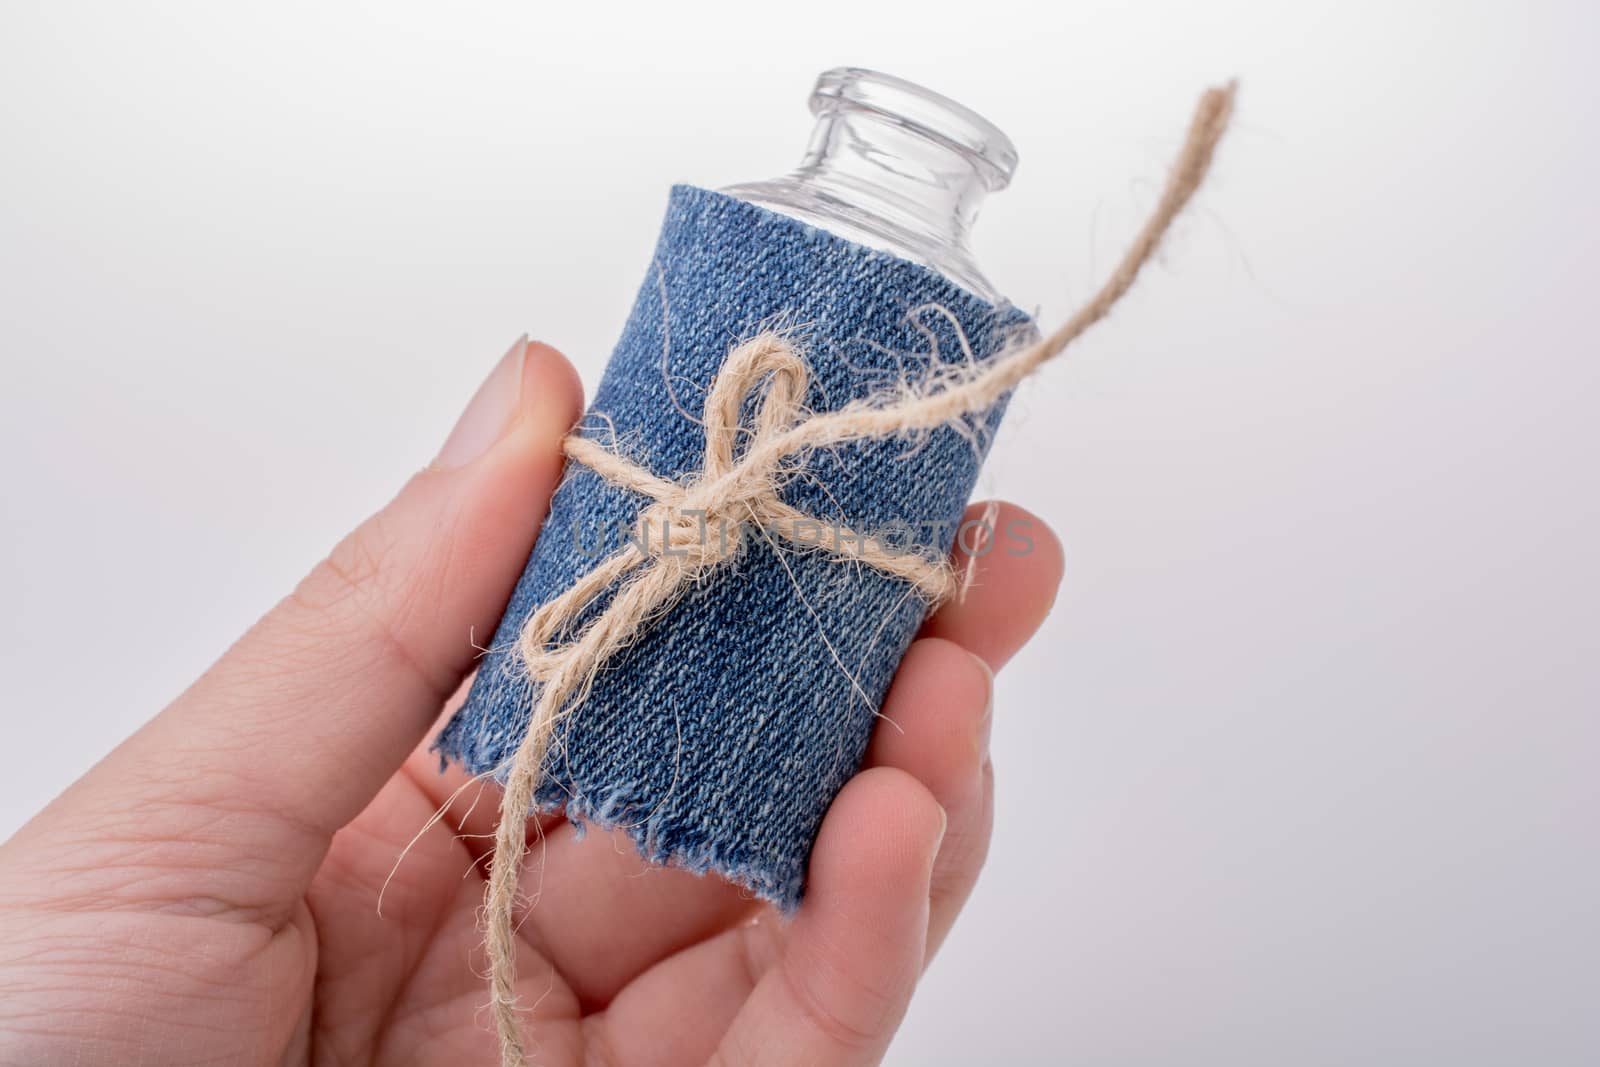 Little empty bottle covered with denim canvas in hand